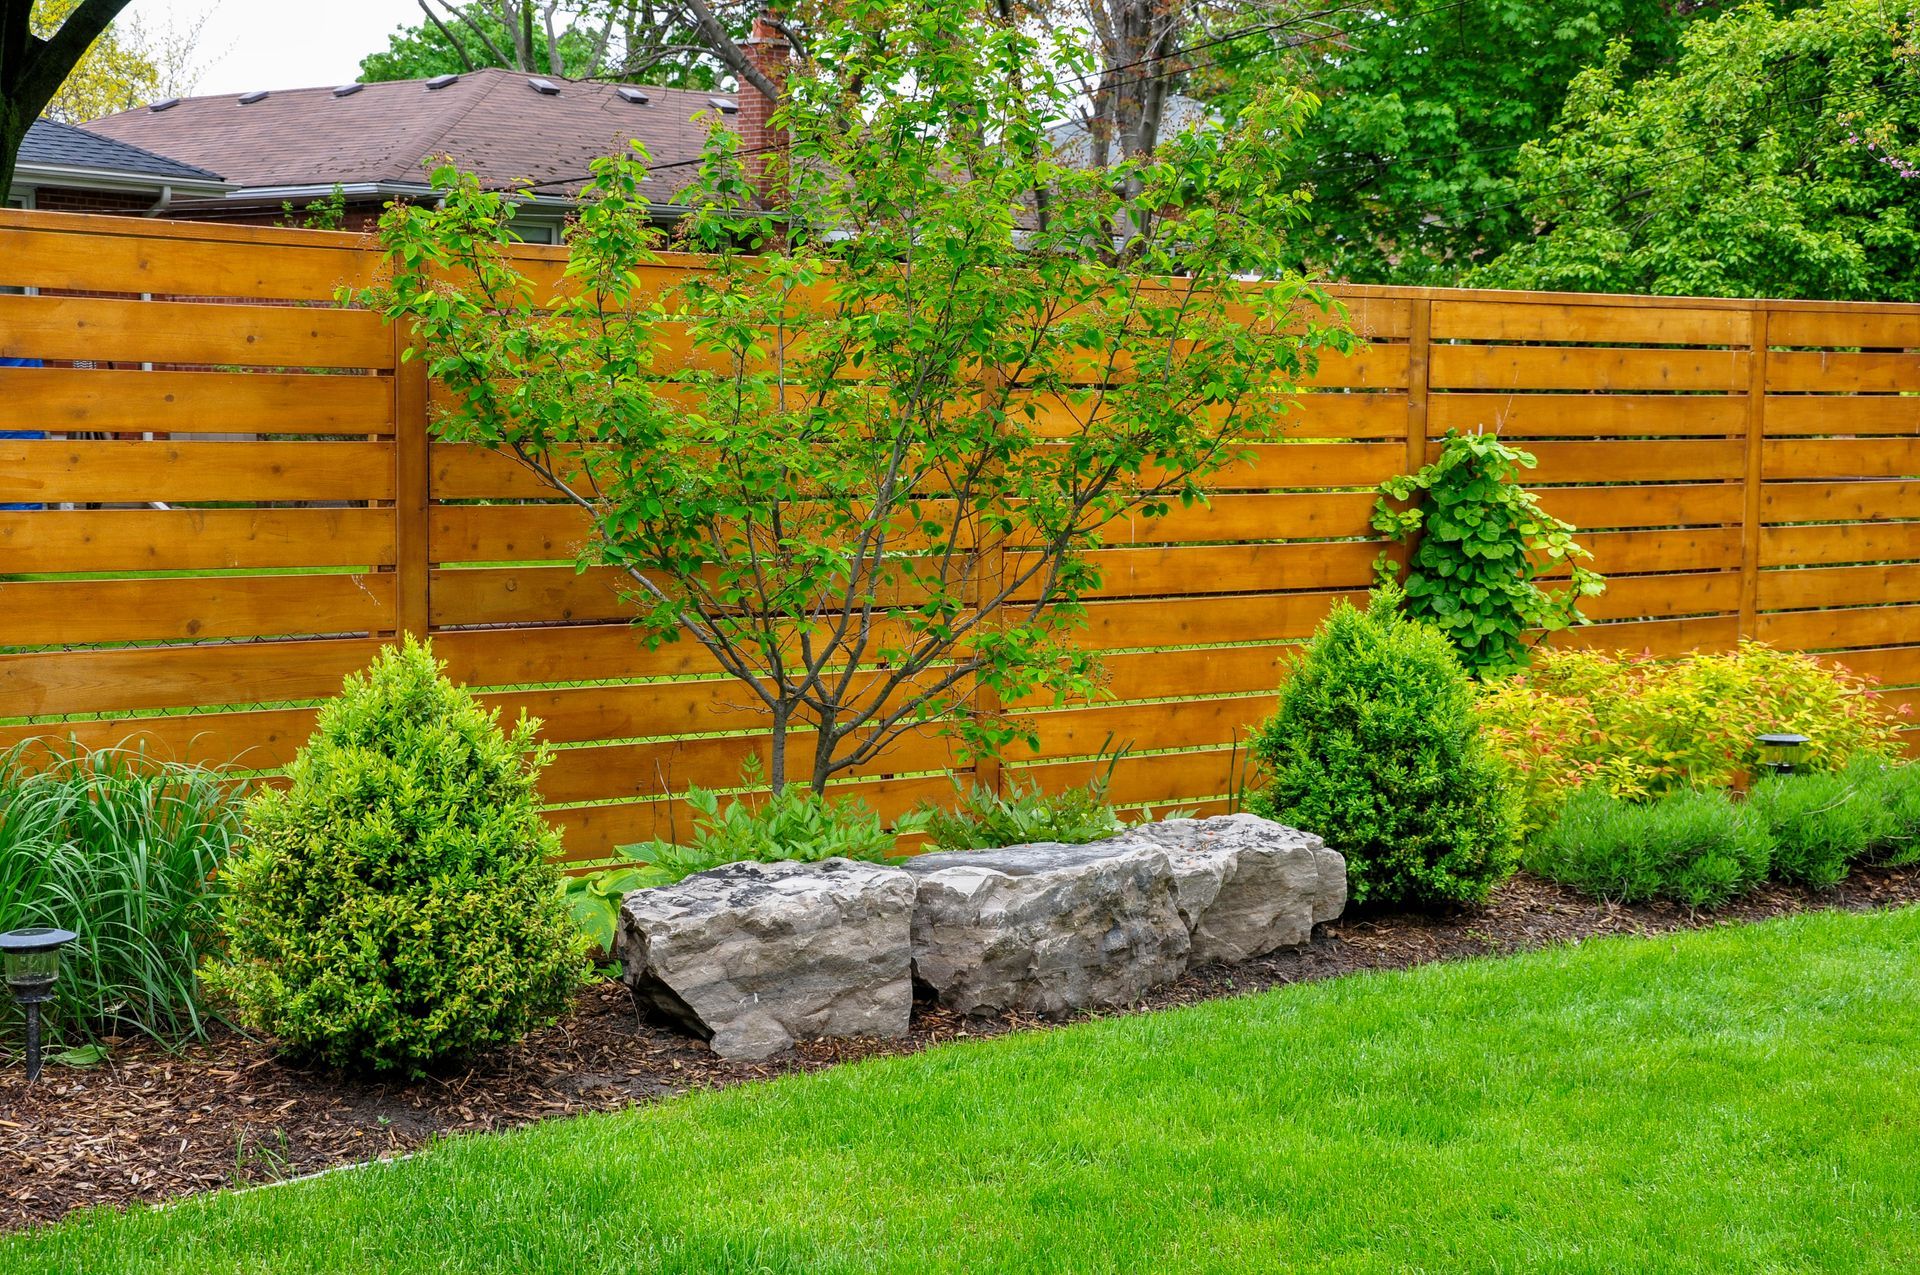 a wooden fence surrounds a lush green lawn in a backyard .